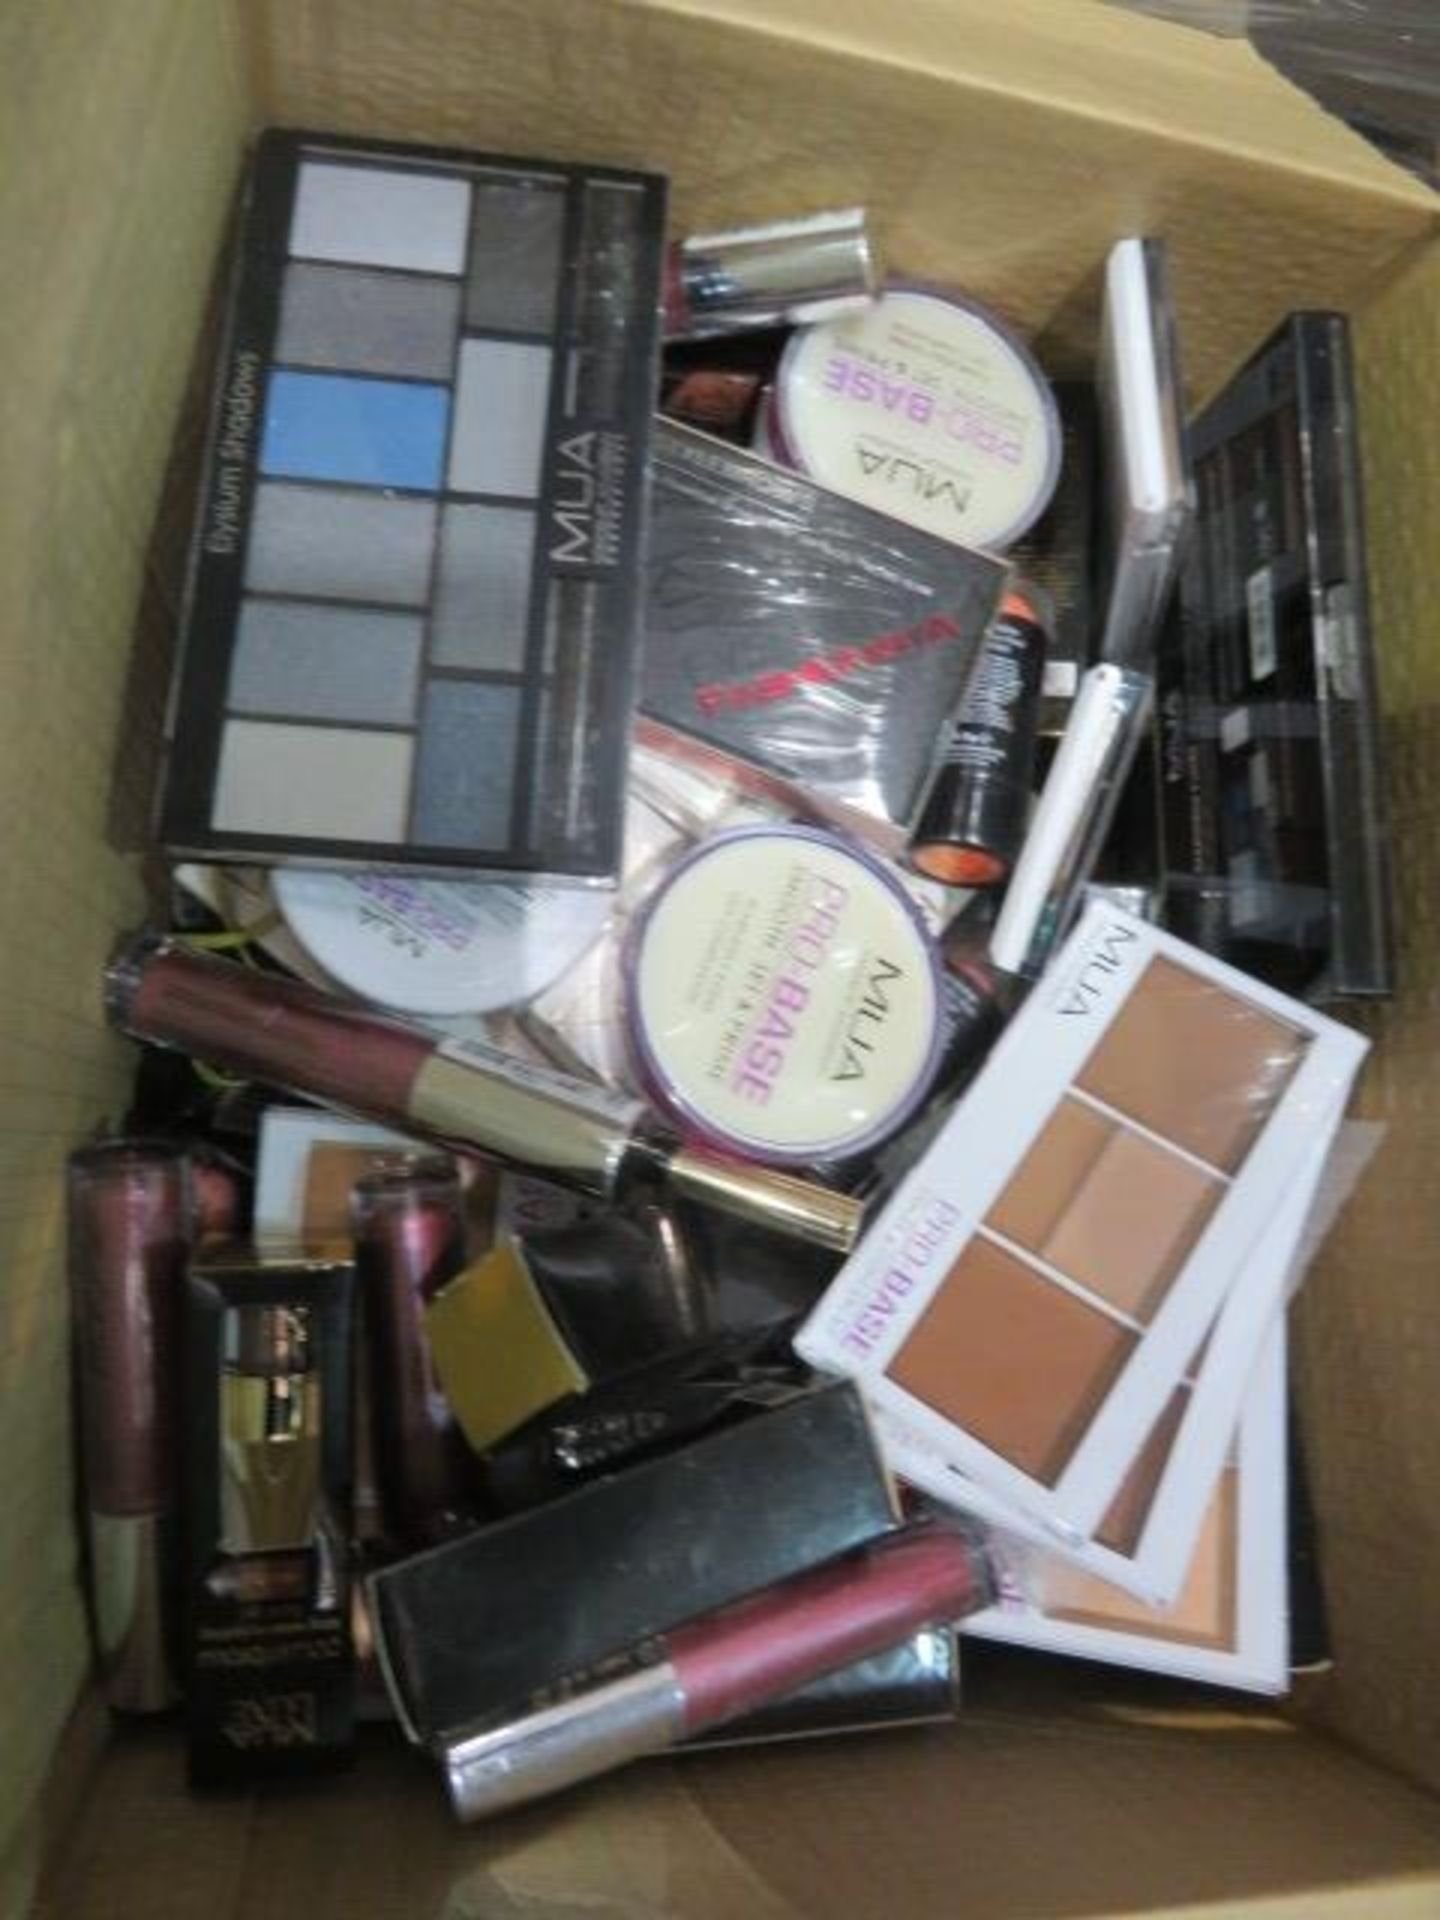 Circa. 200 items of various new make up acadamy make up to include: probase smooth, set & prime,